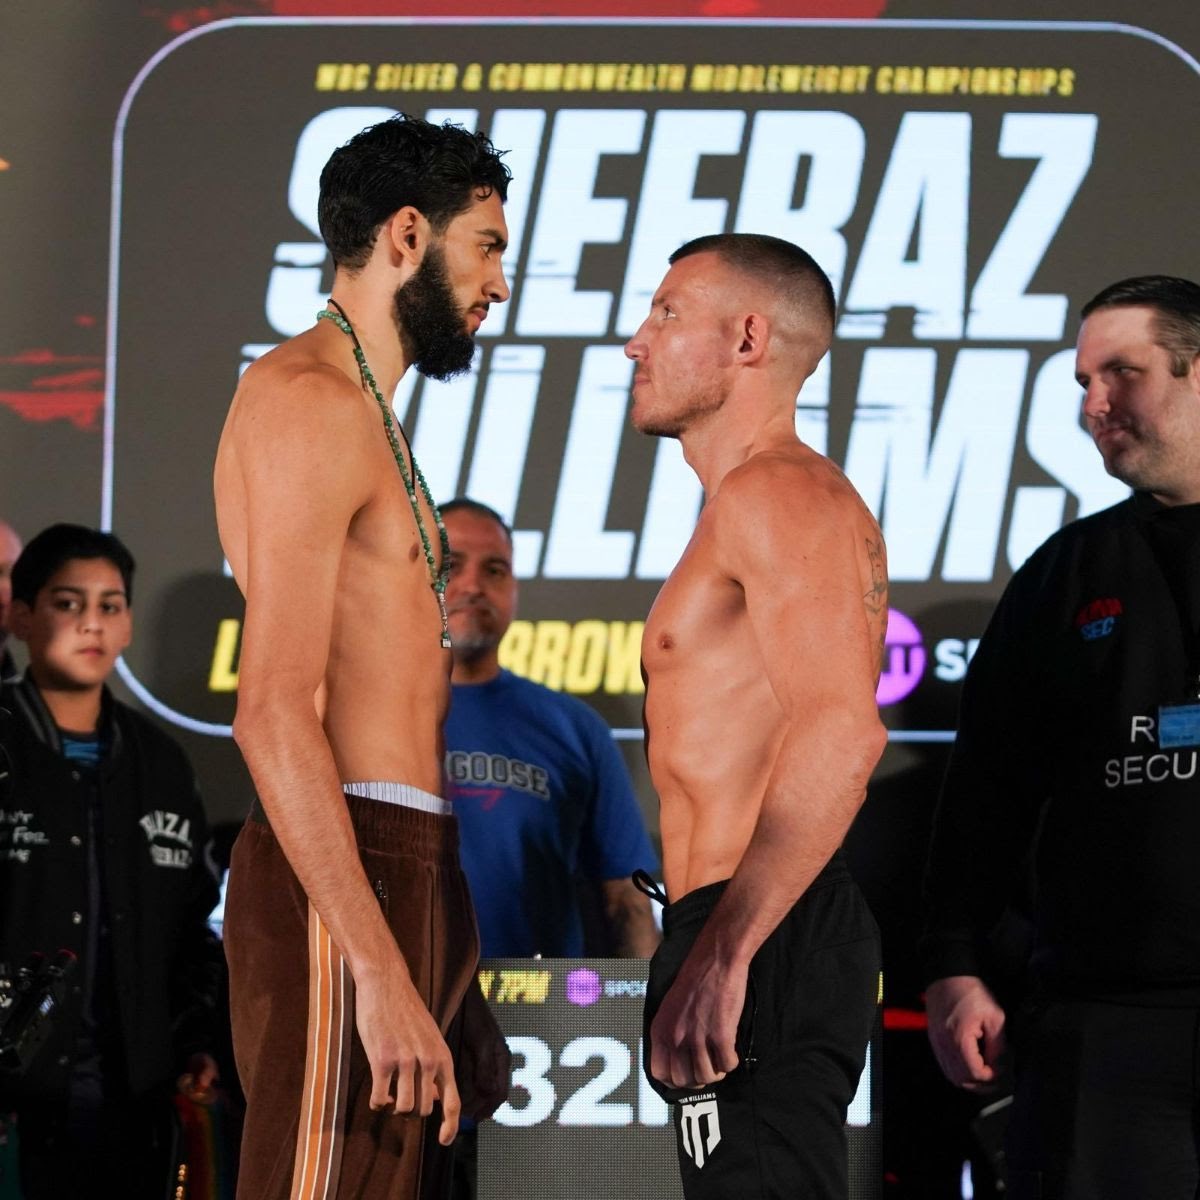 It’s all set… ⚖️ @Liamwilliamsko 159lbs ⚖️ Hamzah Sheeraz 159.4lbs Both boxers under the middleweight limit for their WBC Silver and Commonwealth title fight. 📸 @Queensberry